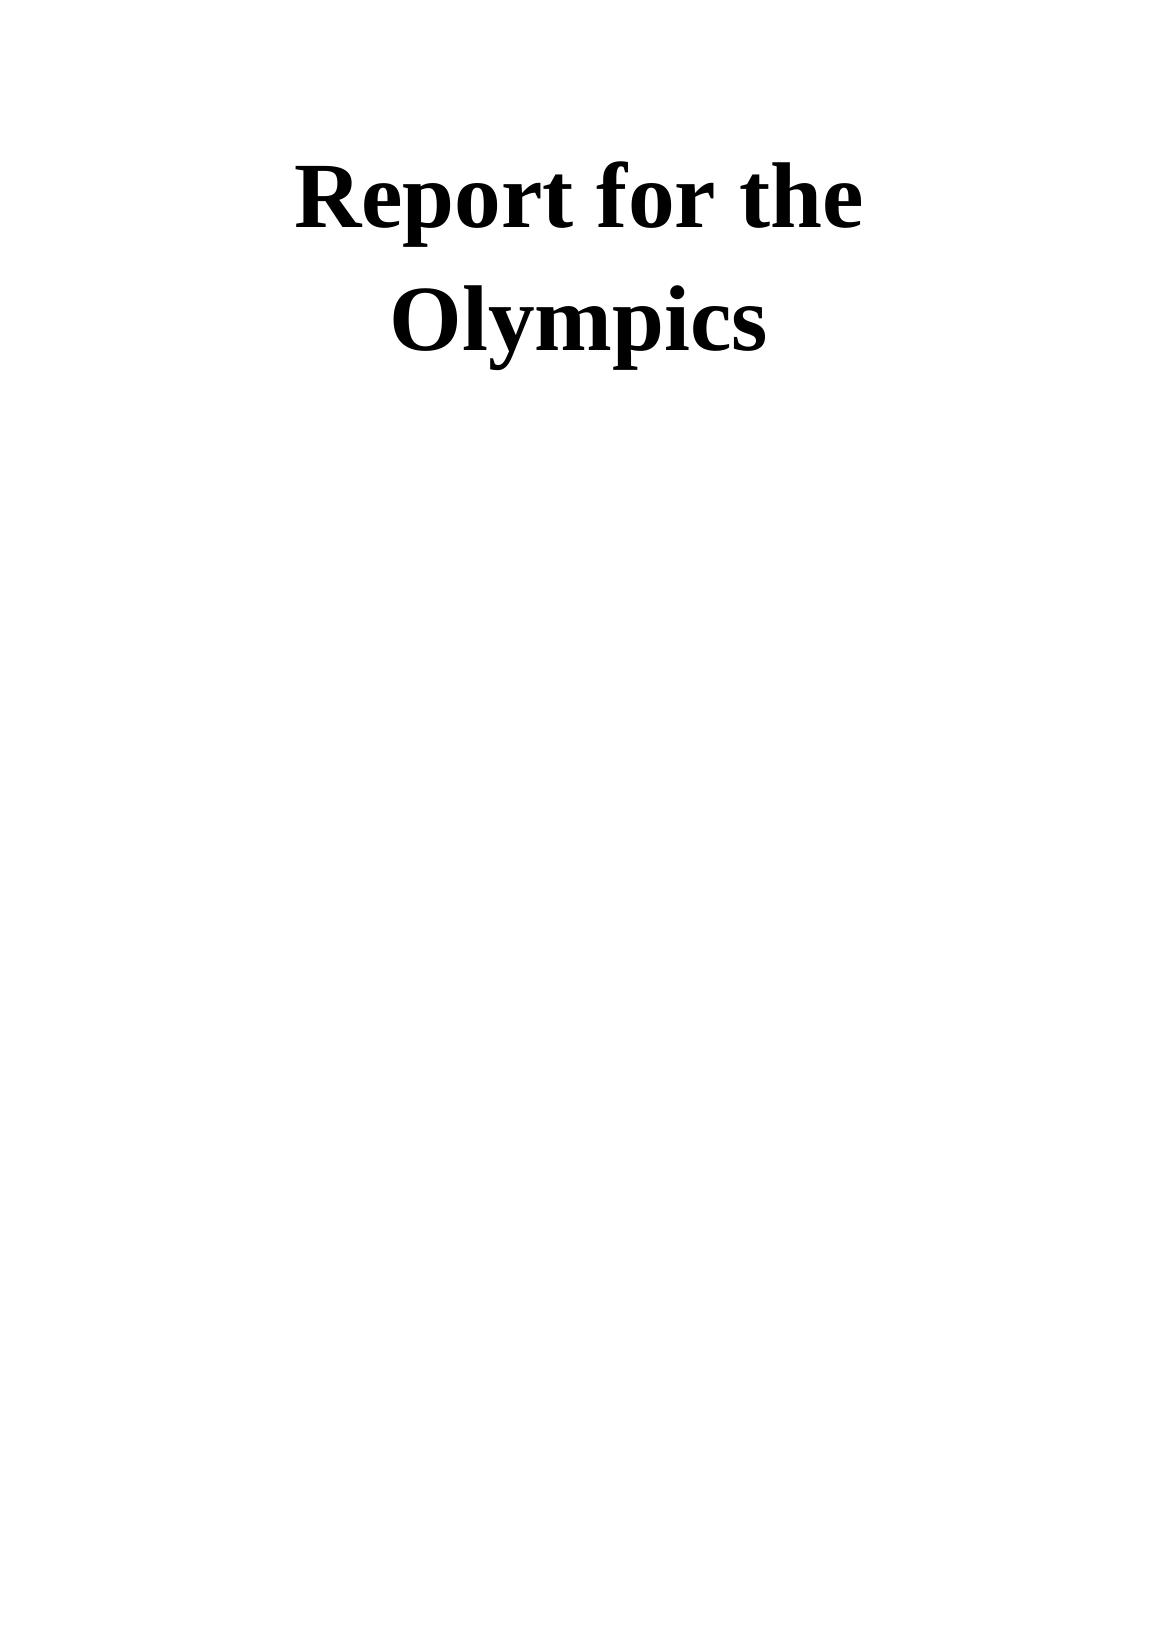 Report for the Olymphics_1